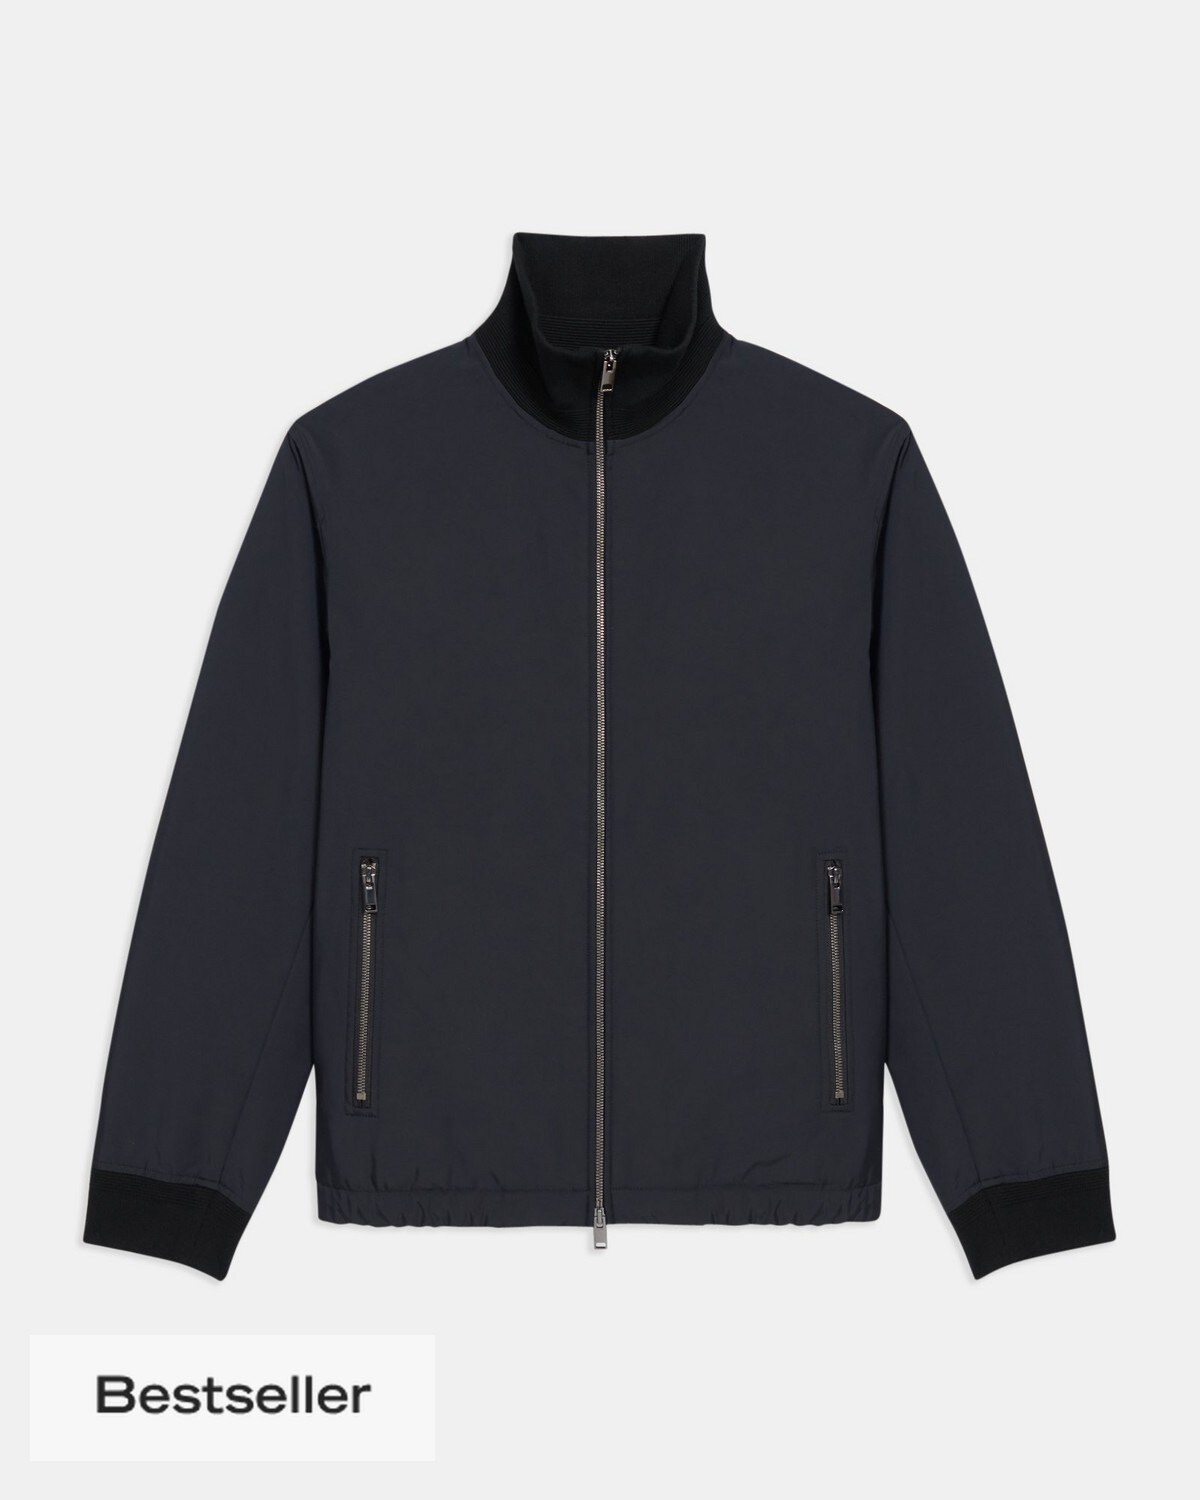 City Bomber Jacket in Water-Resistant Polyester